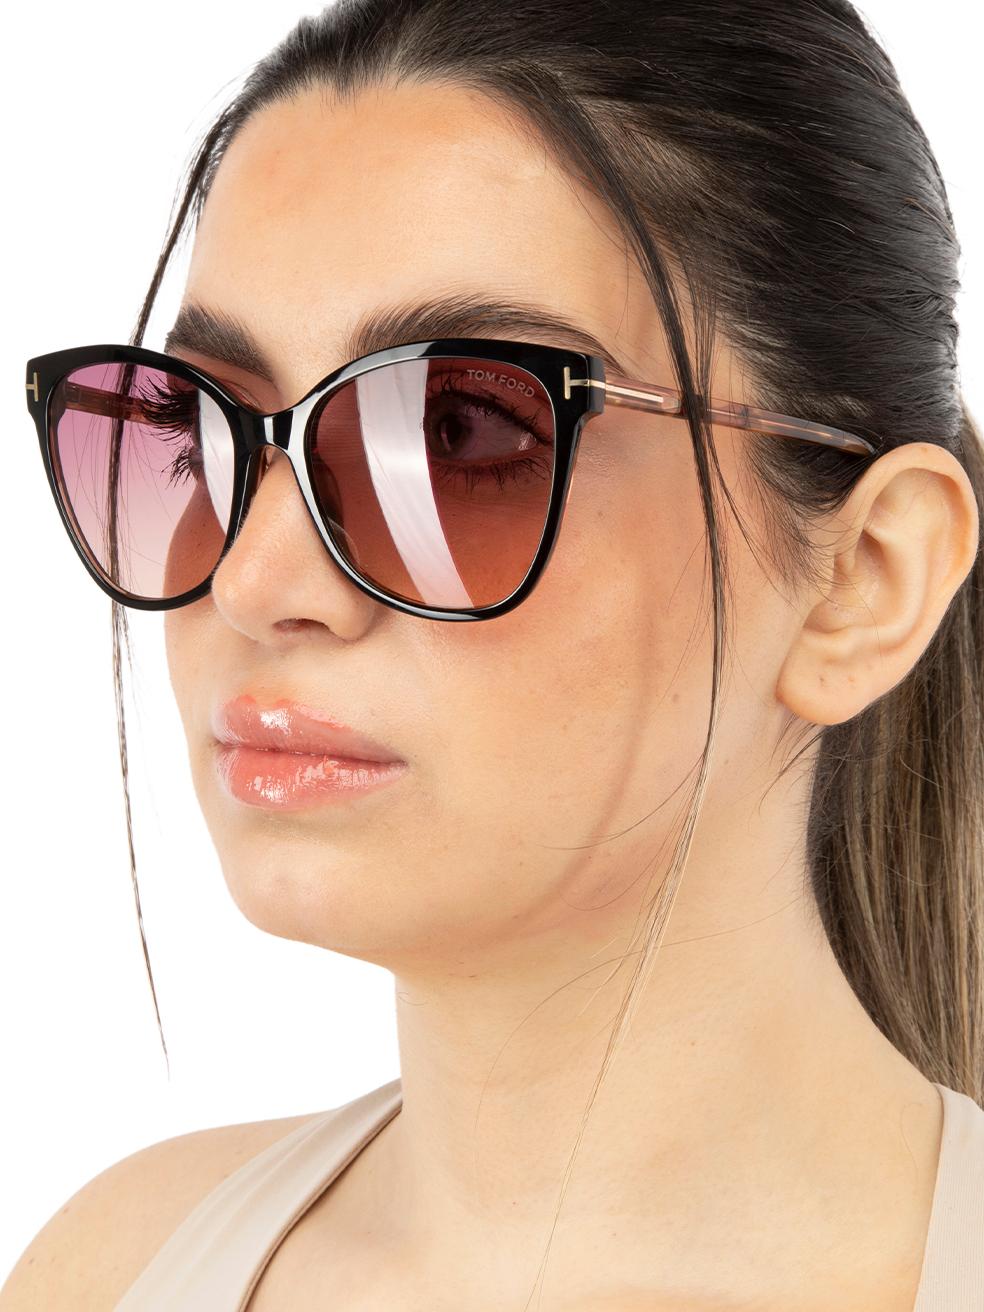 CONDITION is New with tags on this brand new Tom Ford designer item. This item comes with original packaging.
 
 
 
 Details
 
 
 Model: FT0844
 
 Shiny Black/Pink Havana
 
 Acetate
 
 Cat Eye Sunglasses
 
 Pink Gradient Lens
 
 Full-Rim
 
 100% UV